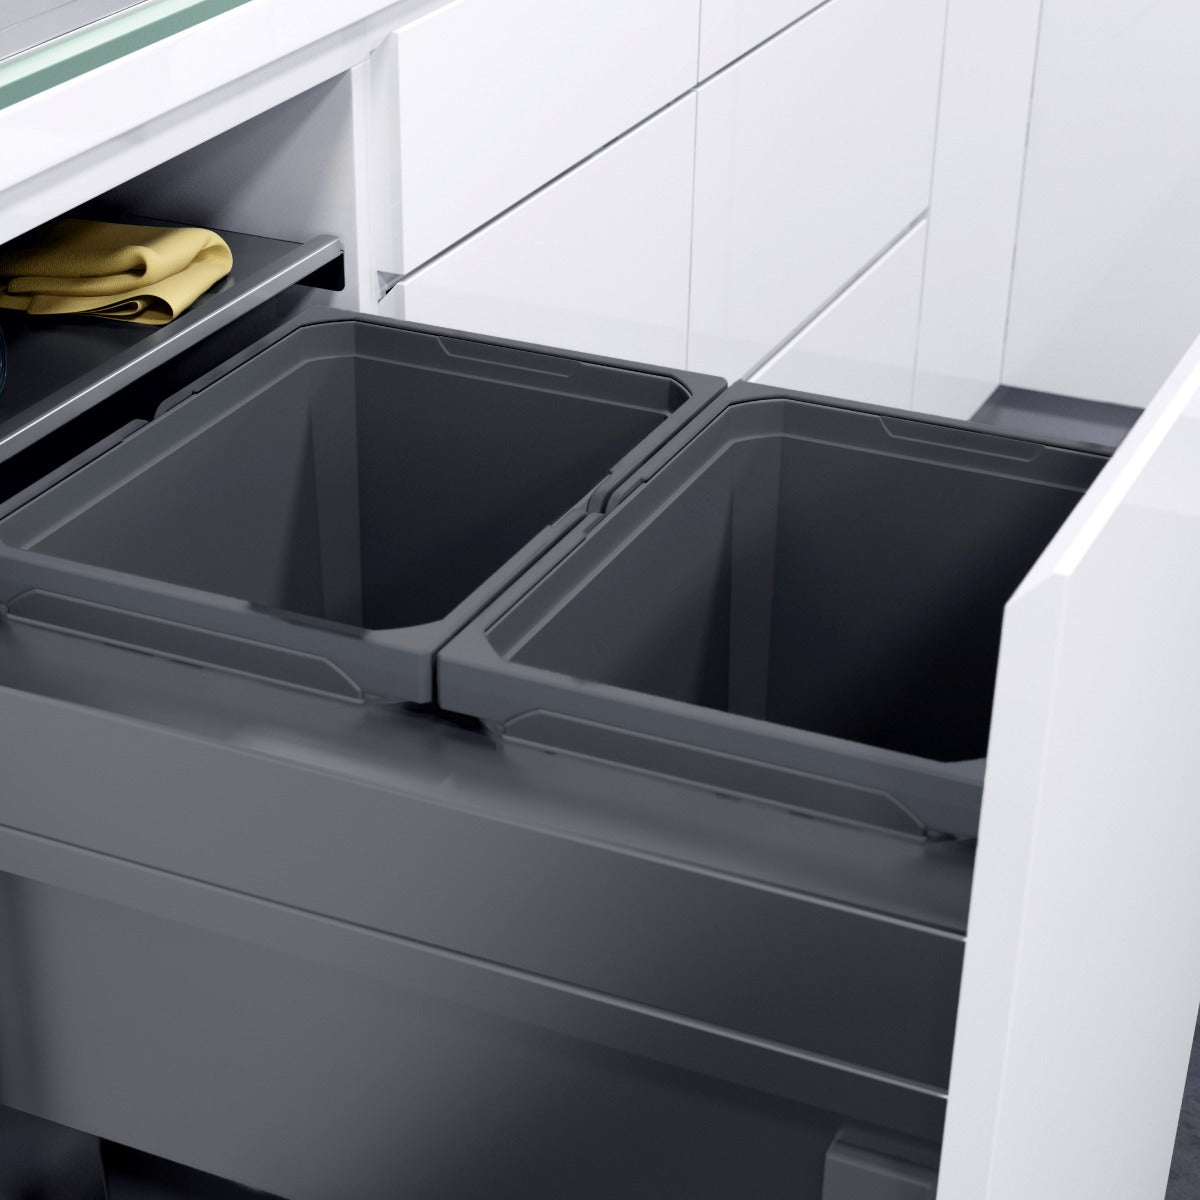 A well-designed integrated kitchen cabinet bin from Vauth-Sage with two compartments, providing 64 litres of waste and recycling space.